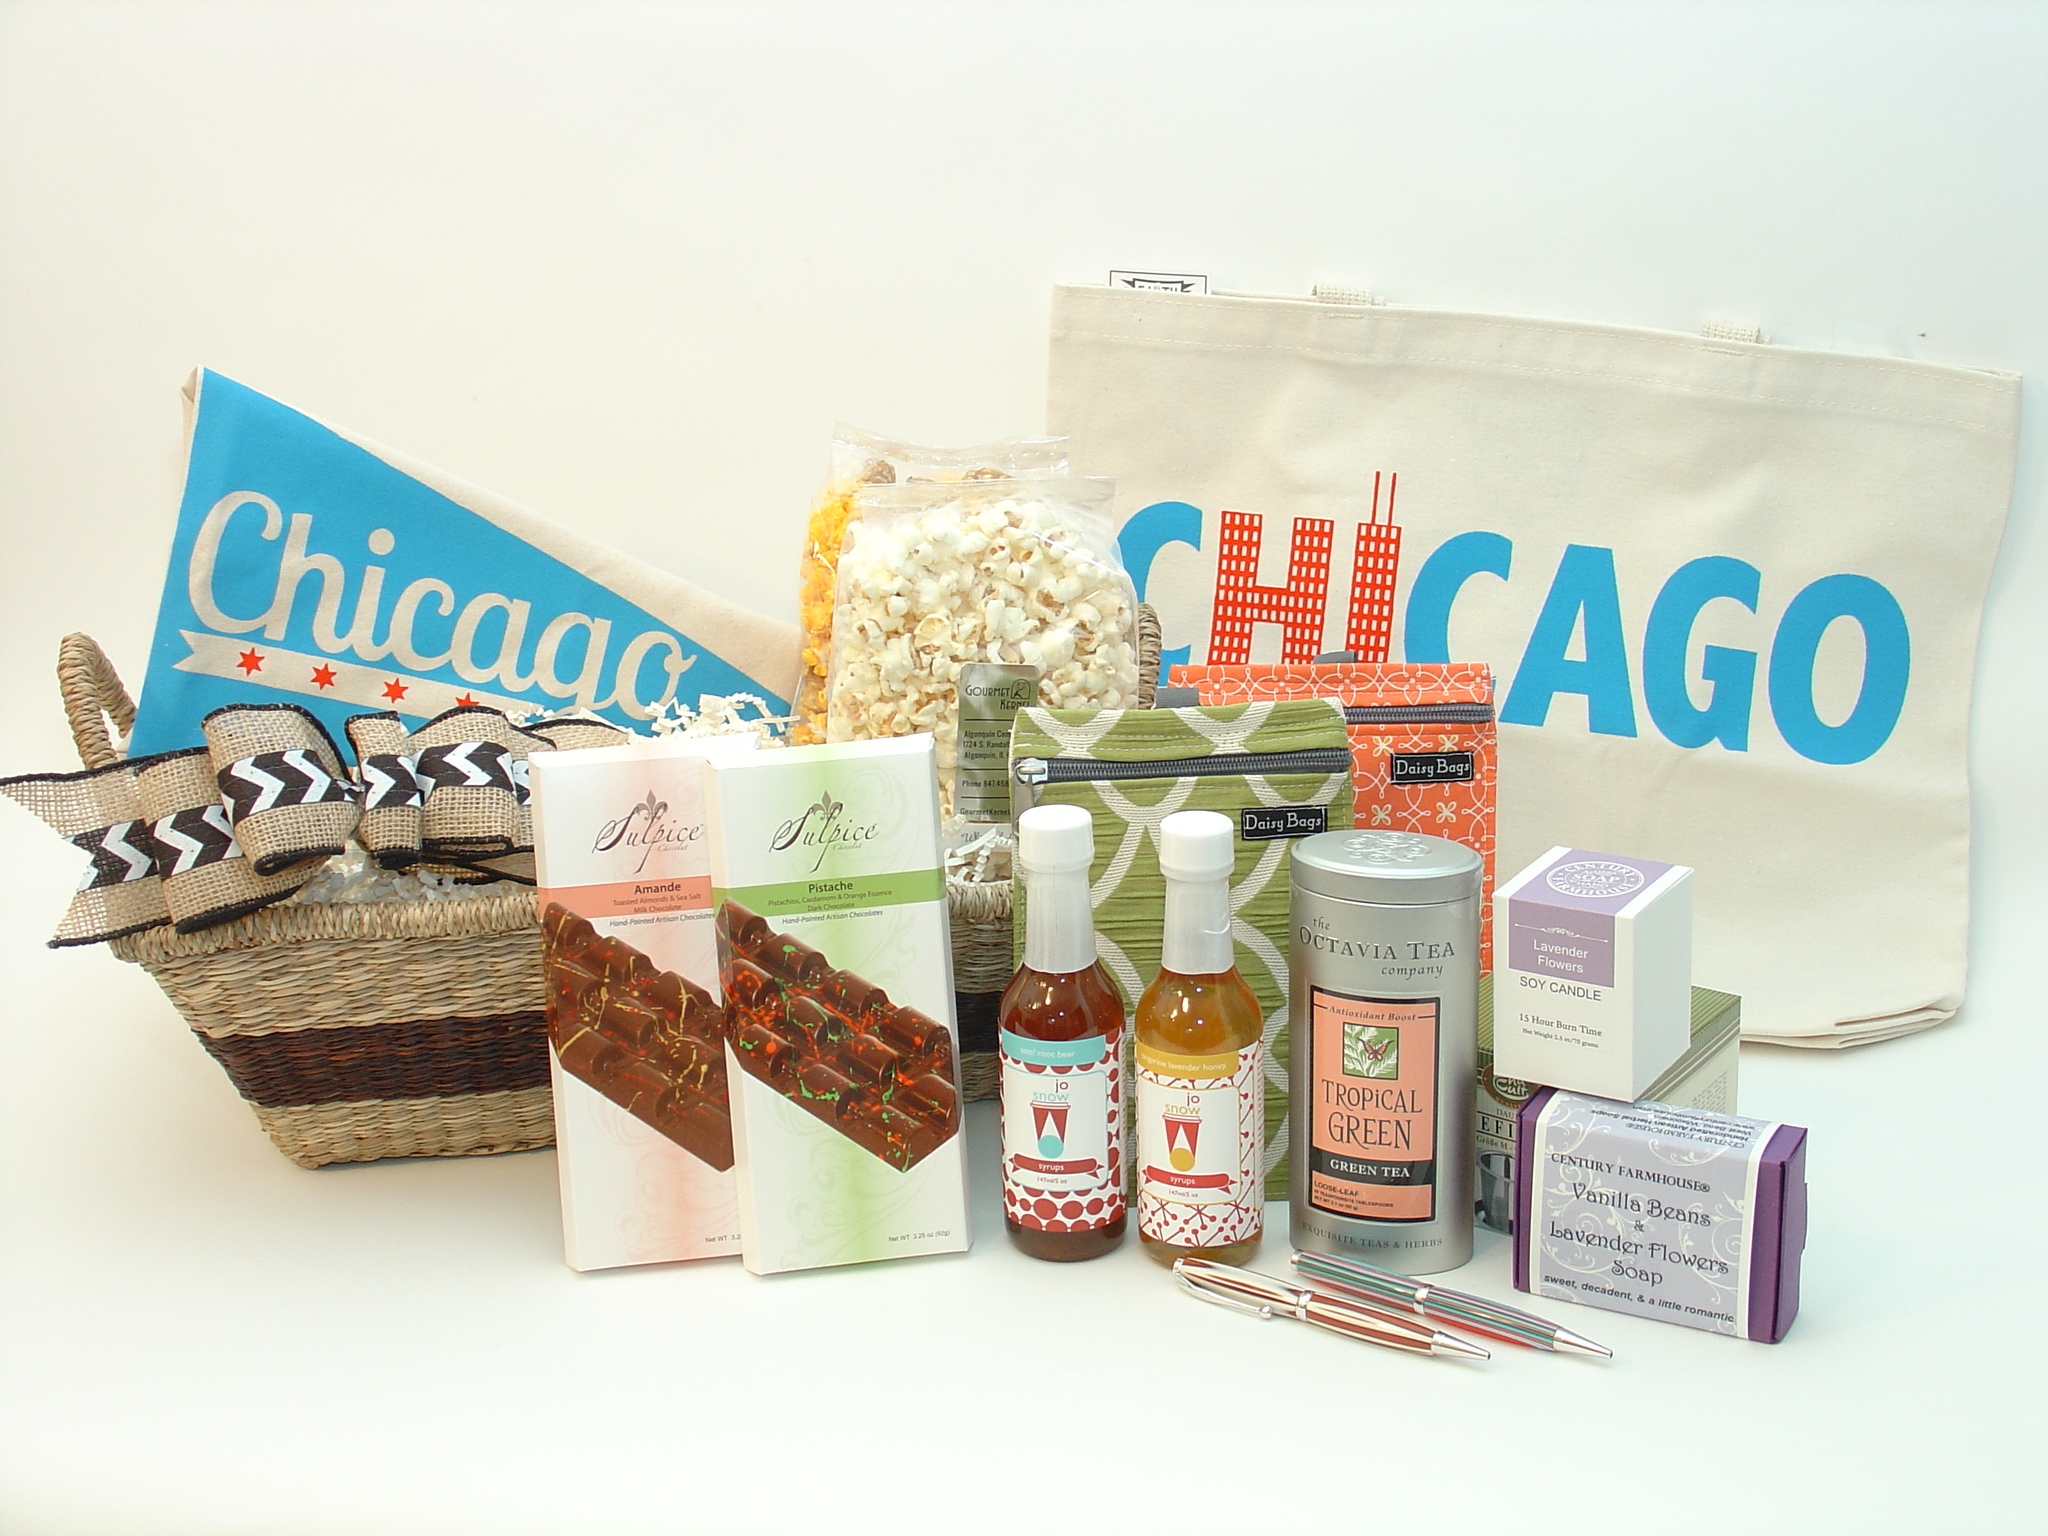 Chicago gourmet gift options from local artisans